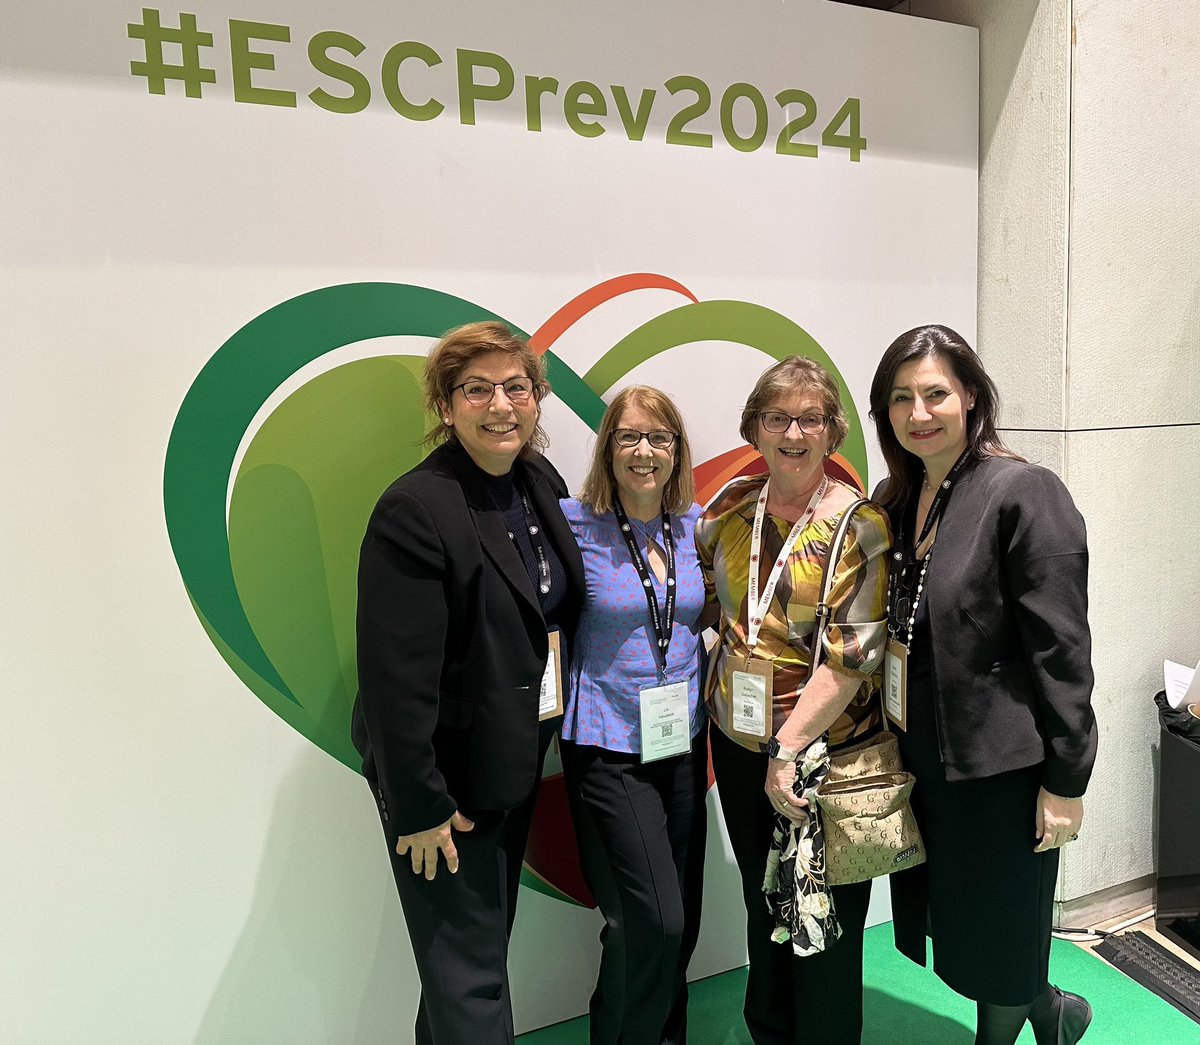 #Gratitude for amazing friends at #ESCPrev2024 🙏 @lisneubeck @elenikle @RobynDGallagher for your support & friendship 🩵 So wonderful to reunite & to meet you finally amazing Eleni @elenikle🌟